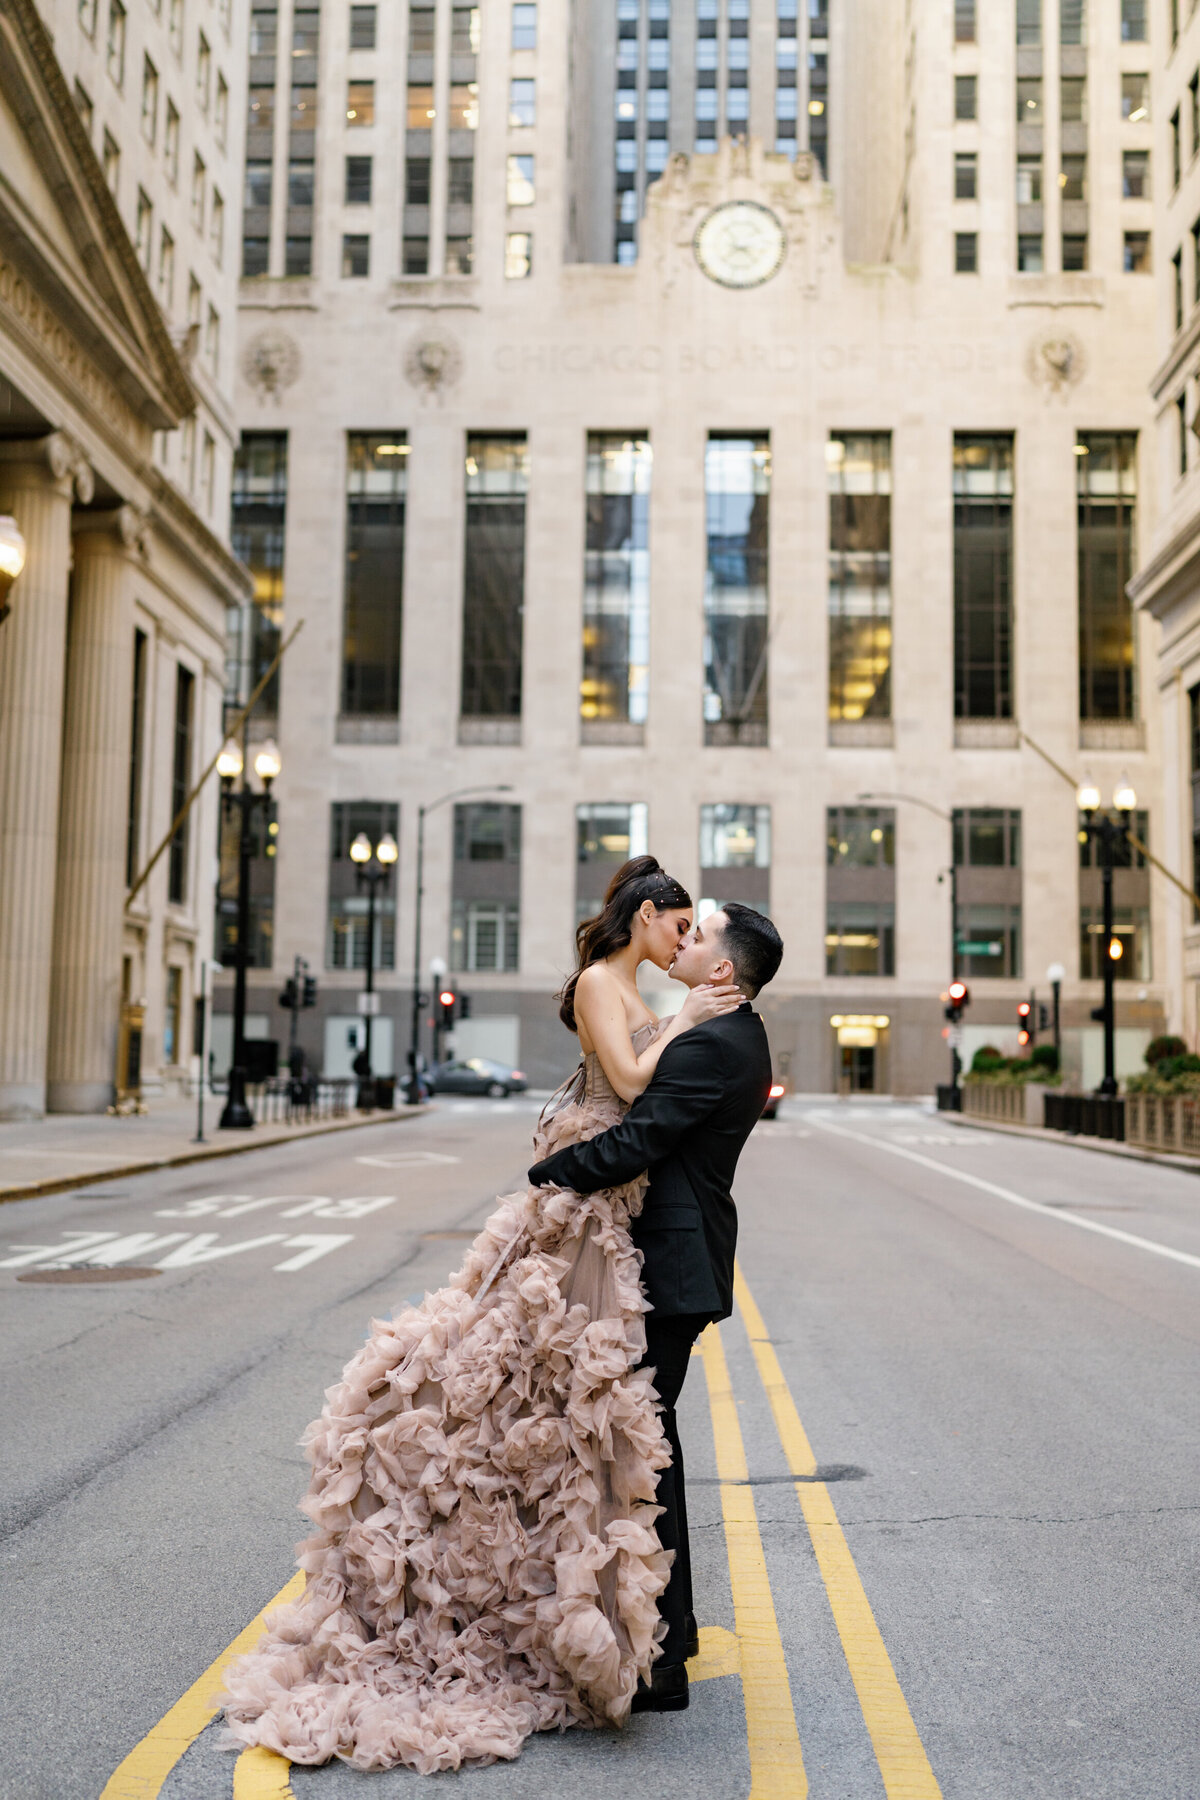 Aspen-Avenue-Chicago-Wedding-Photographer-Rookery-Engagement-Session-Histoircal-Stairs-Moody-Dramatic-Magazine-Unique-Gown-Stemming-From-Love-Emily-Rae-Bridal-Hair-FAV-59